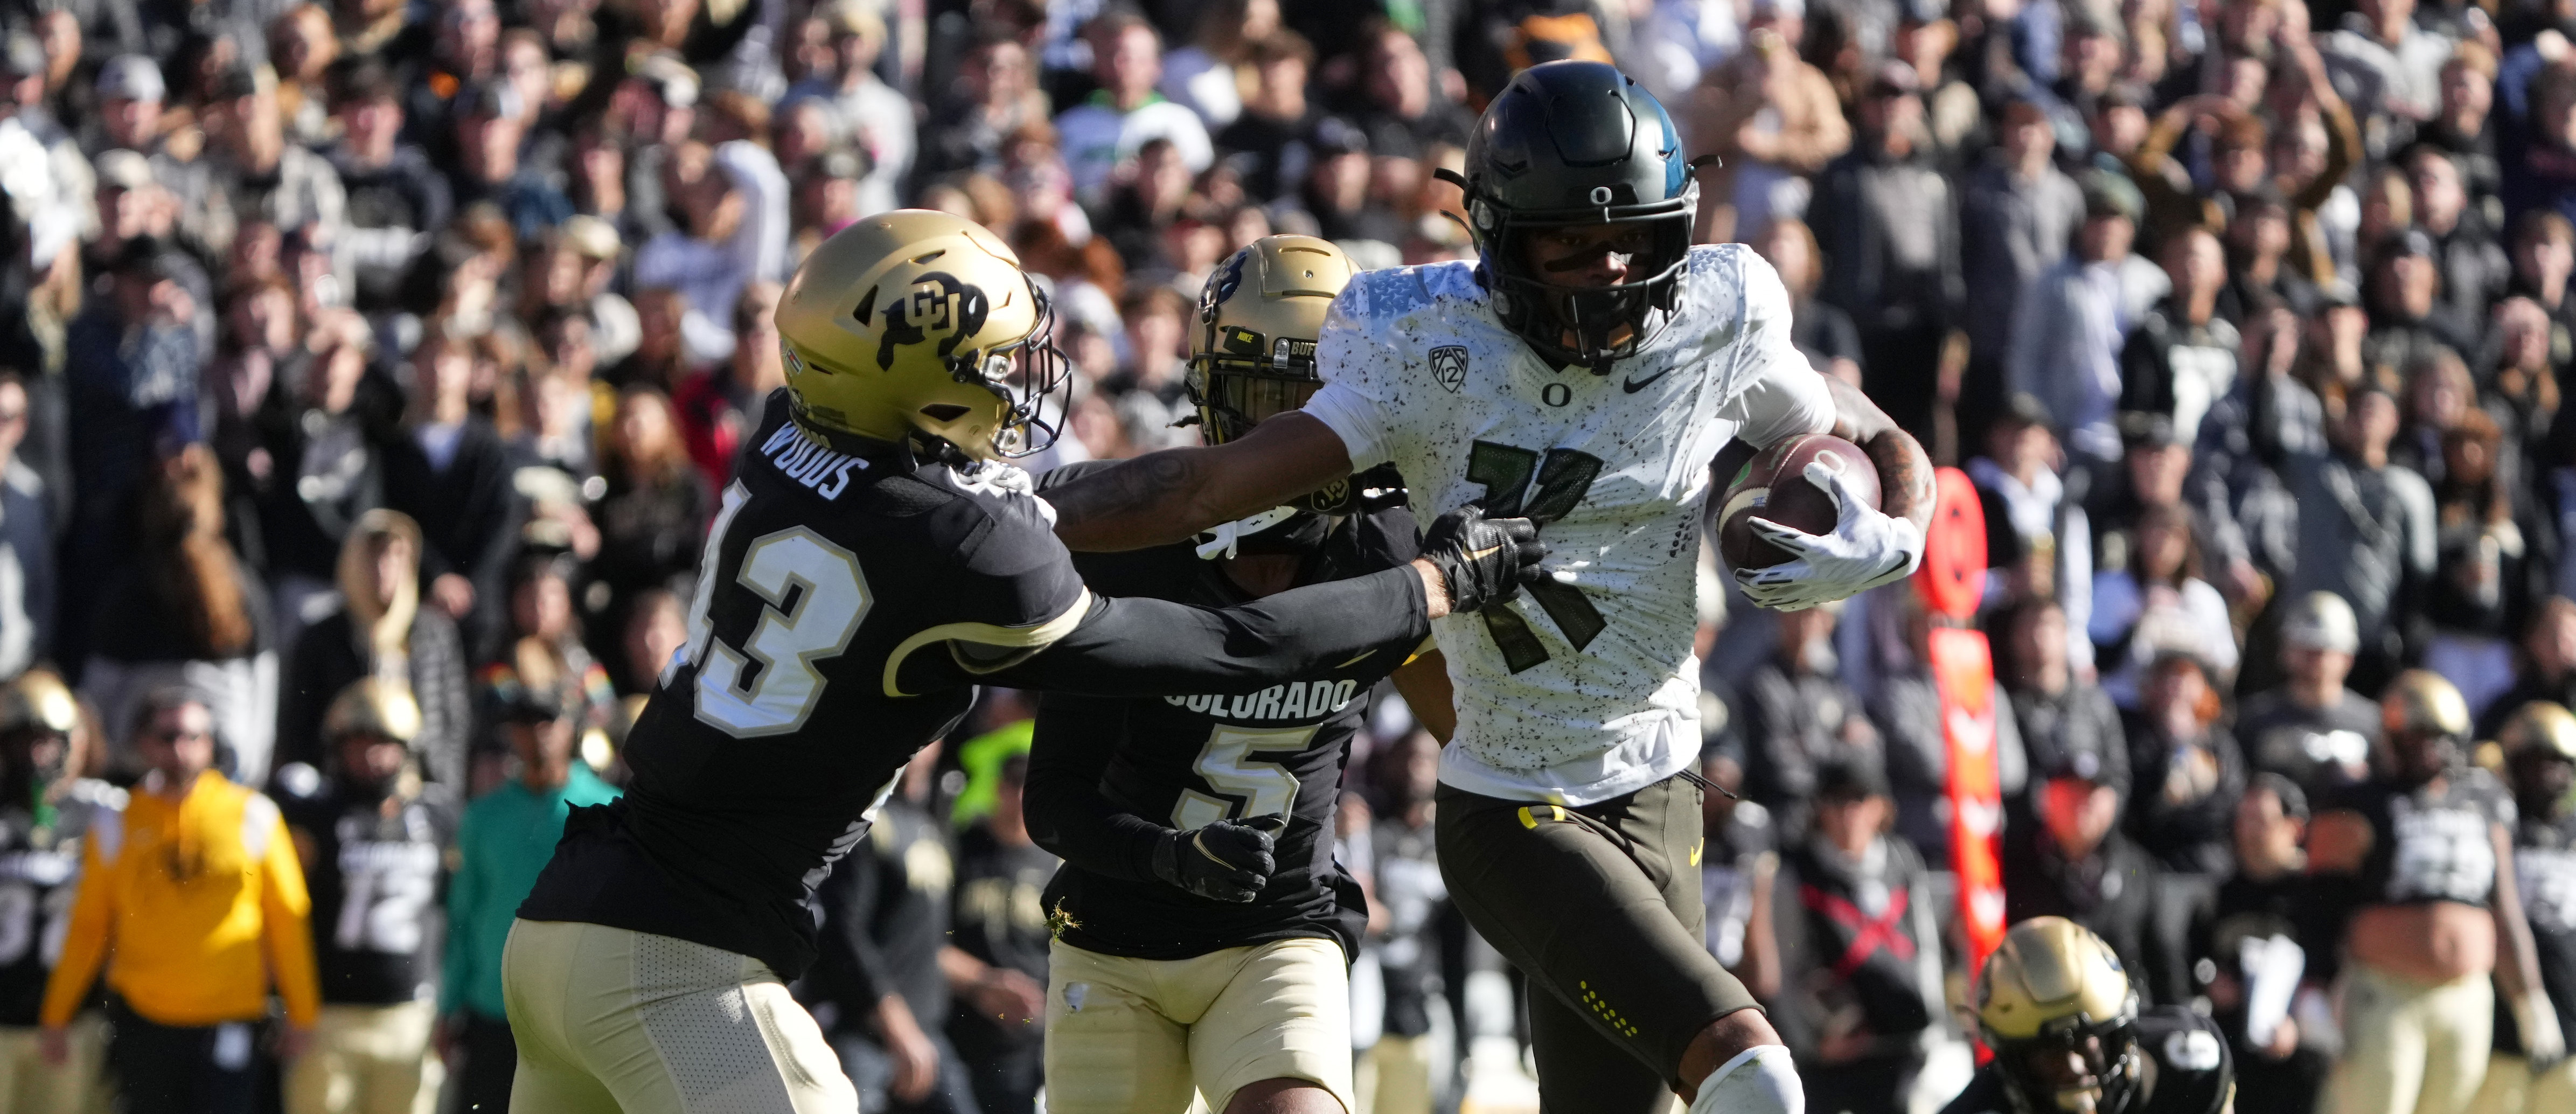 Oregon Stomps Colorado 49-10 in Another Offensive Explosion